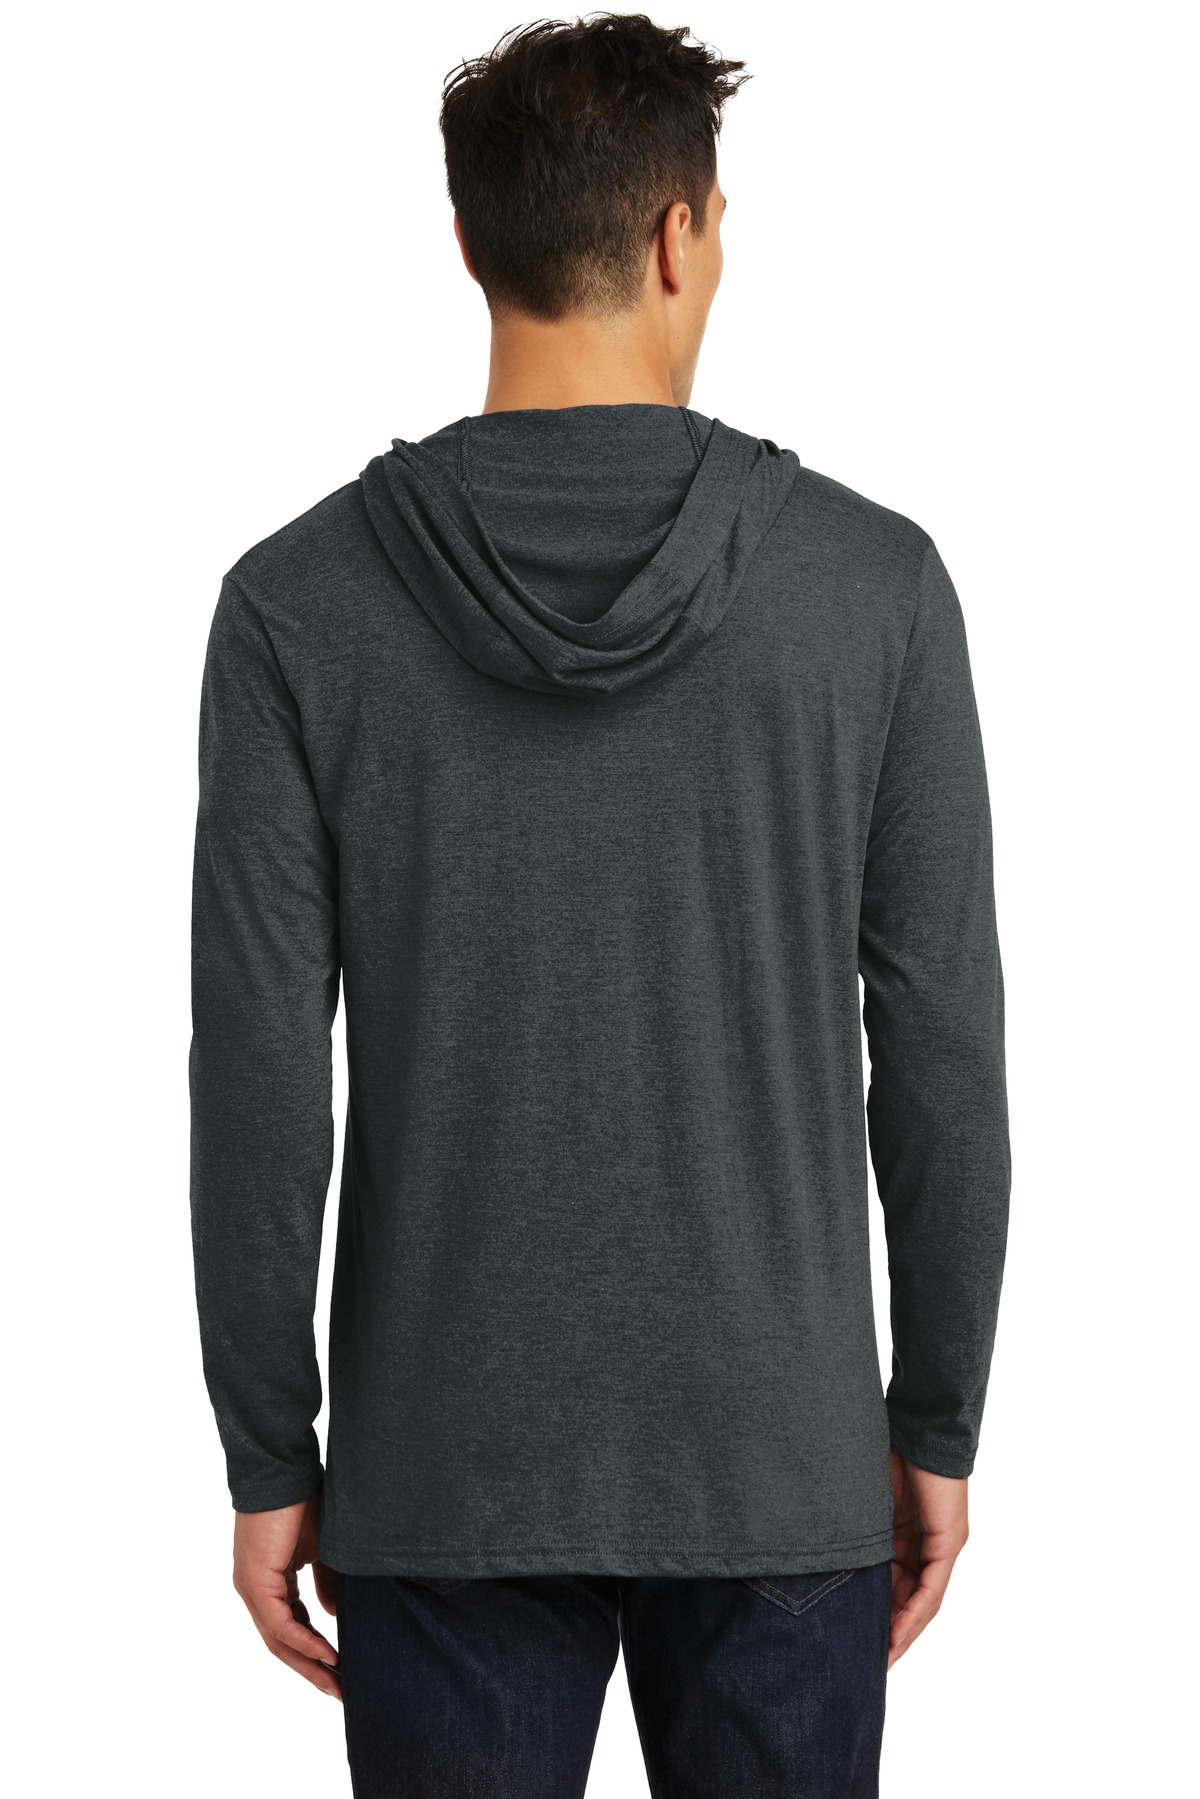 District Made Mens Perfect Tri Long Sleeve Hoodie-S (Black Frost) - image 2 of 6